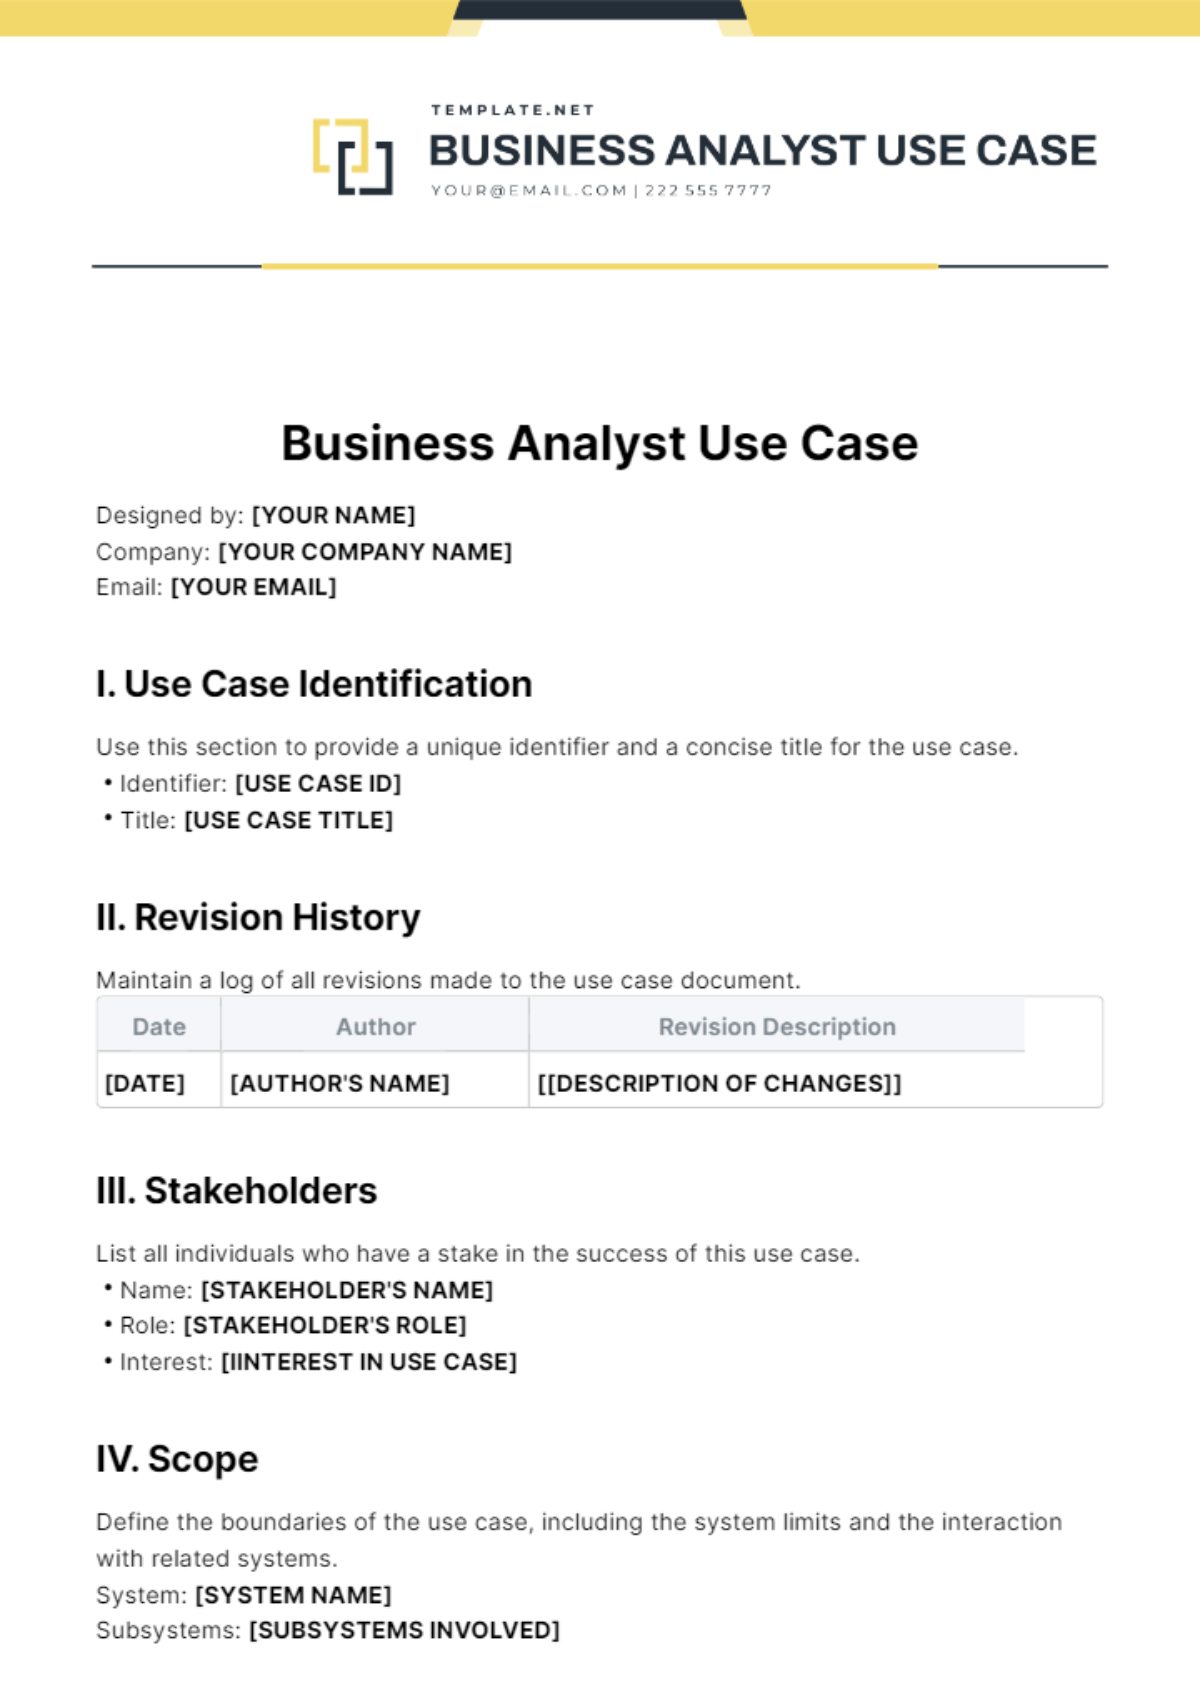 Business Analyst Use Case Template